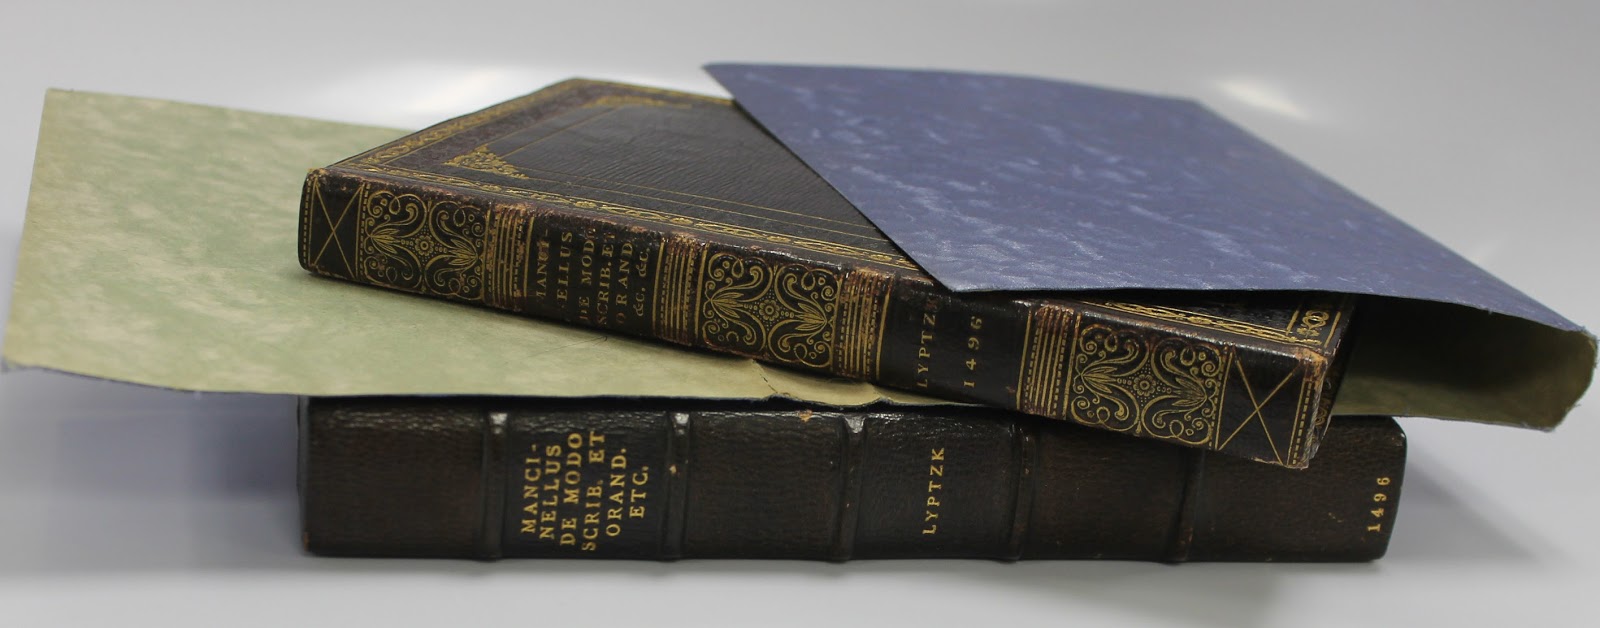 Side view of two brown and gold manuscript books stacked on top of one another.